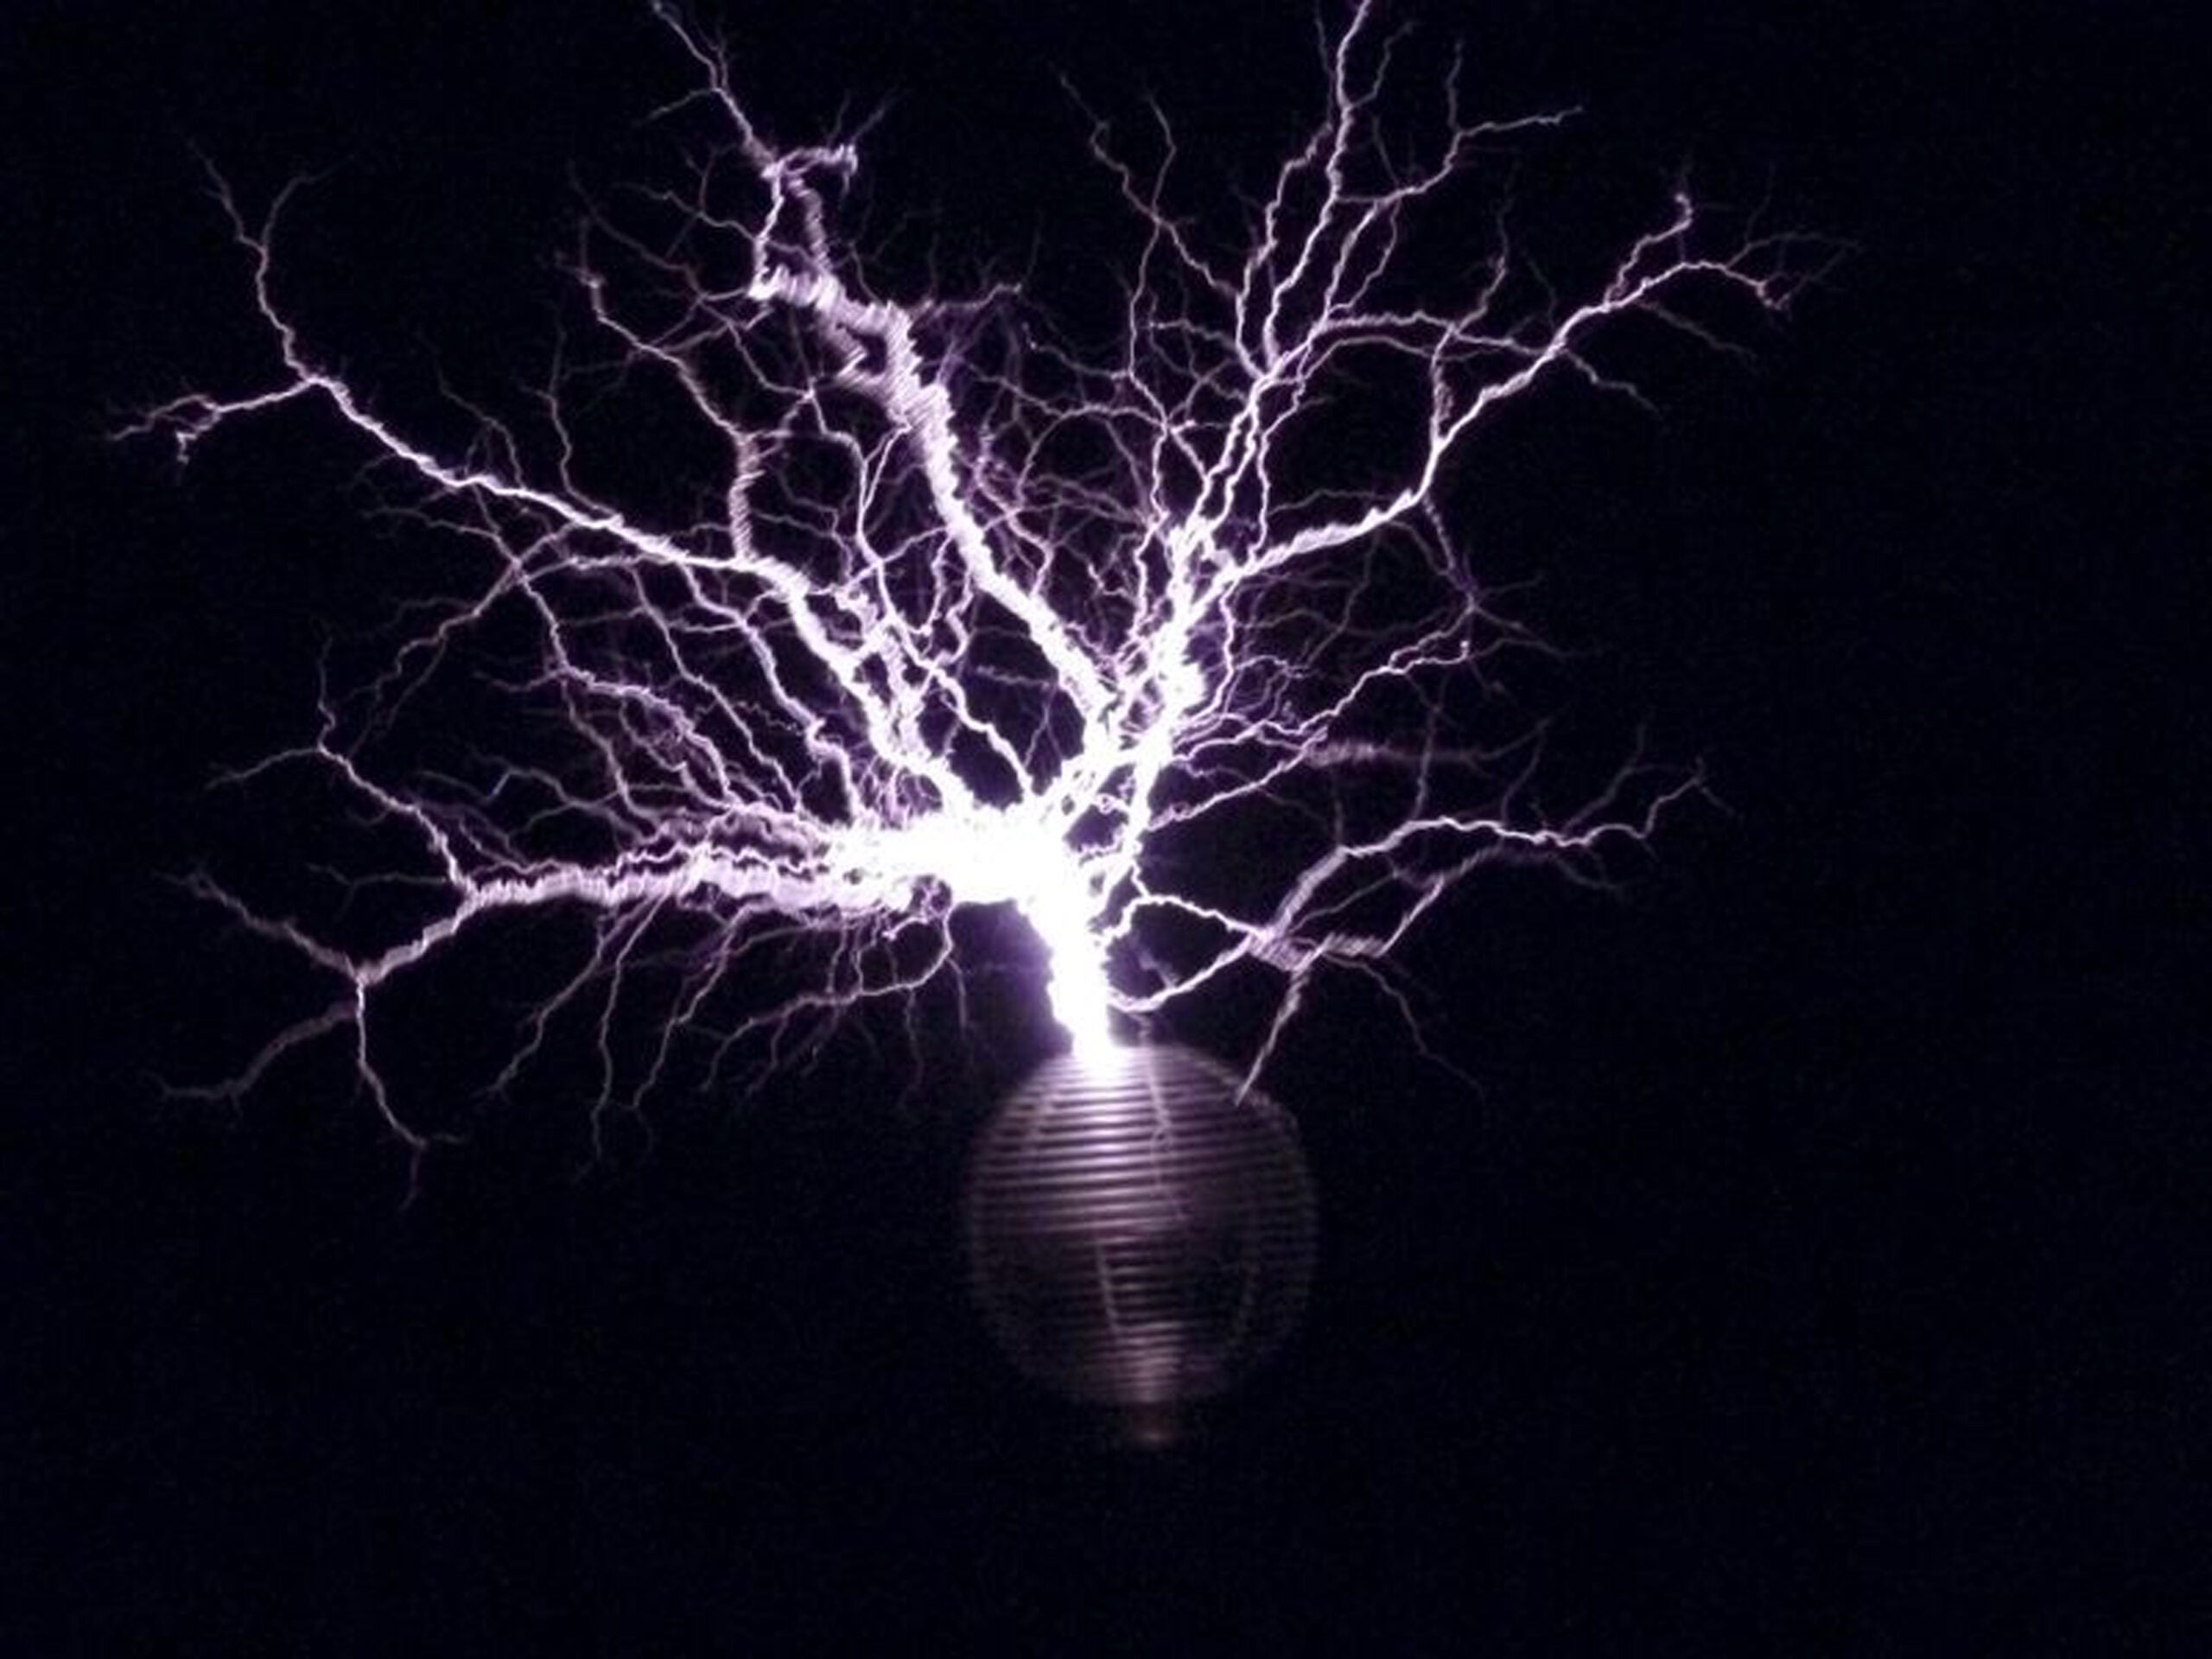 Electrifying! Tesla coil film brings powerful 'Lighting Dreams' to Museum  of Science